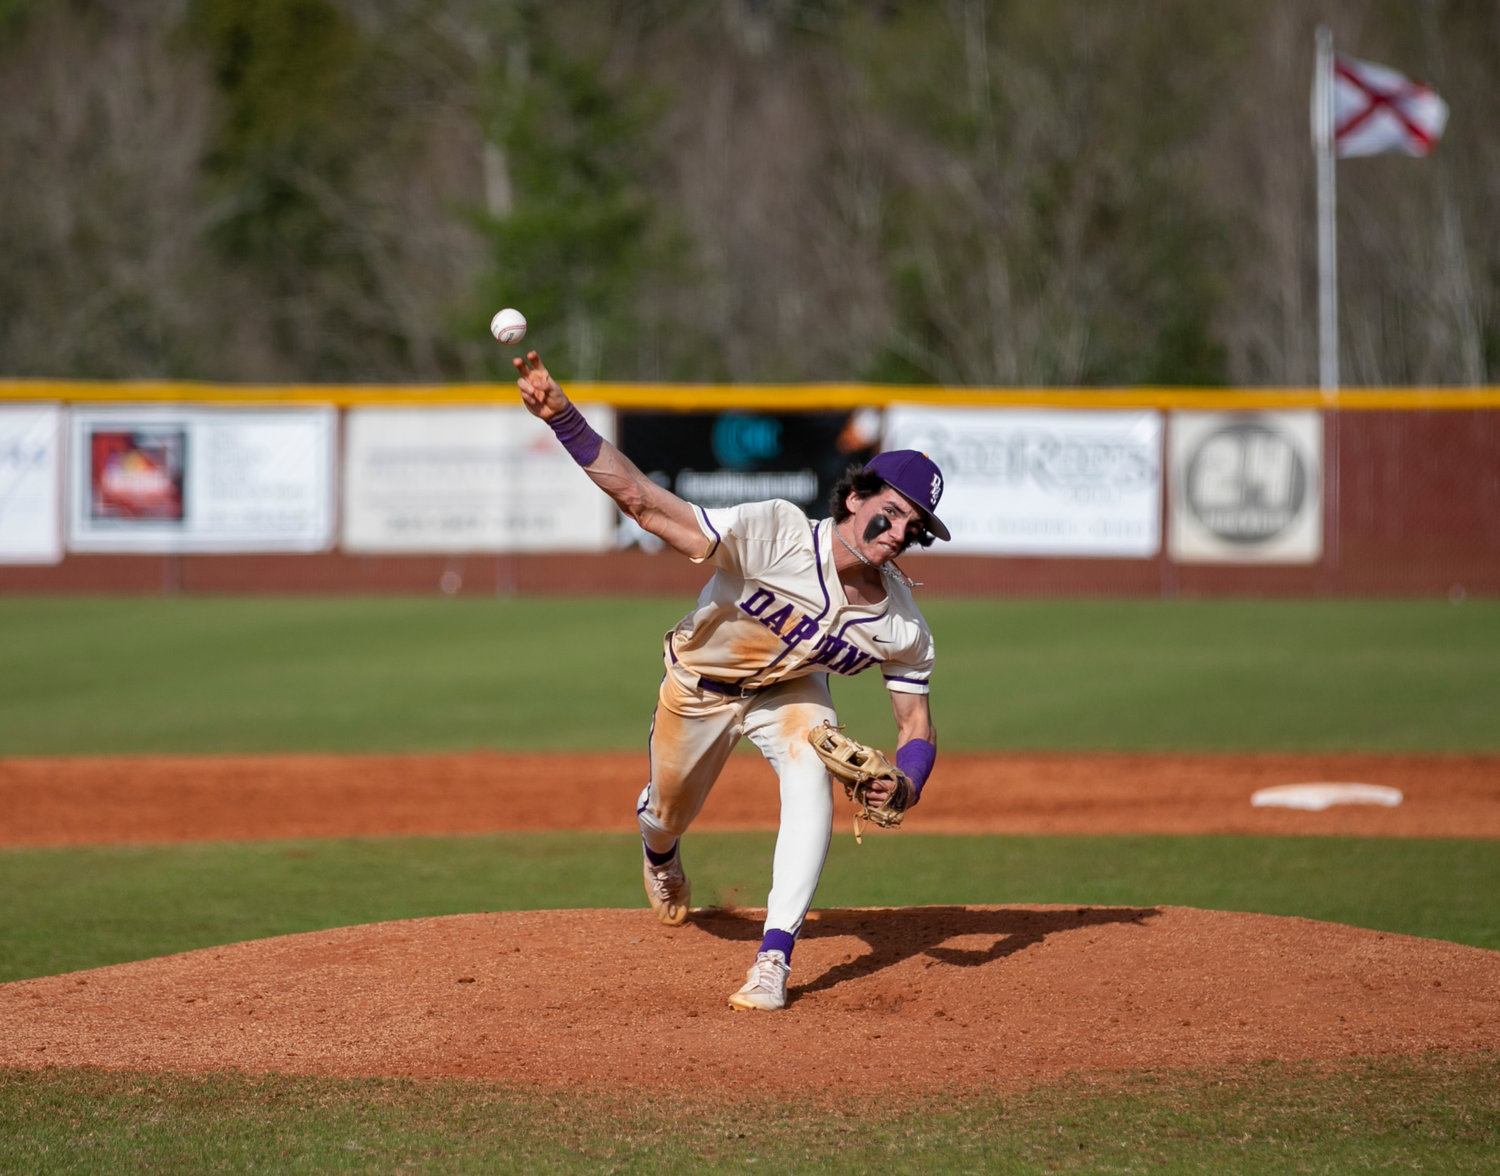 Daphne freshman shortstop and Tennessee commit Steele Hall pitches in relief during the Trojans’ South Alabama Showdown game against the Tuscaloosa County Wildcats at Robertsdale High School Saturday, Feb. 25. After he supplied the go-ahead, two-RBI double in the bottom of the sixth, Hall recorded the save on the mound in the seventh where he topped out throwing 91 mph.